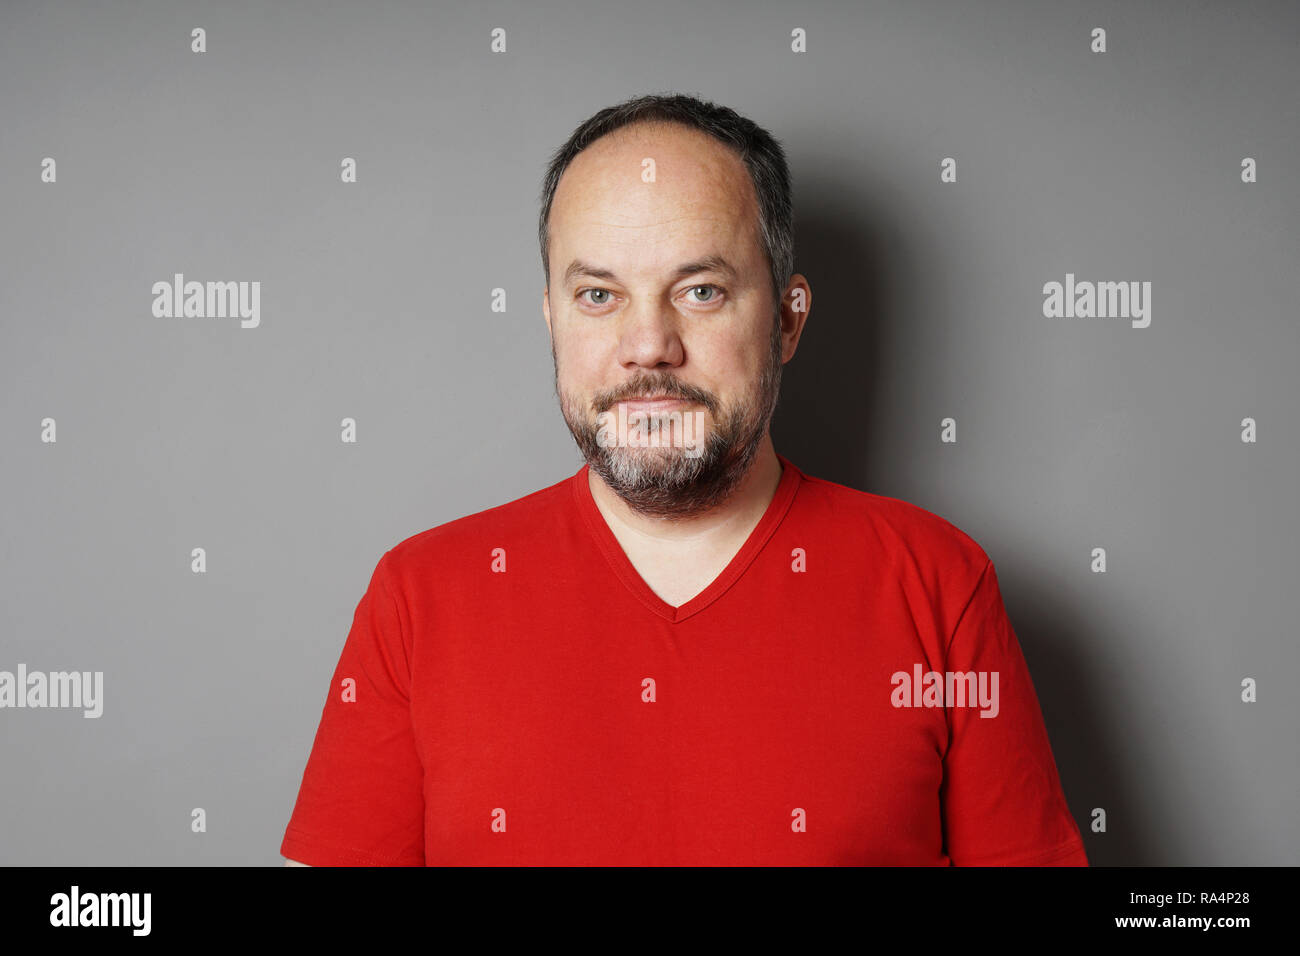 middle aged man in his 40s wearing red t-shirt with short dark hair and graying beard smirking - gray wall background with copy space Stock Photo